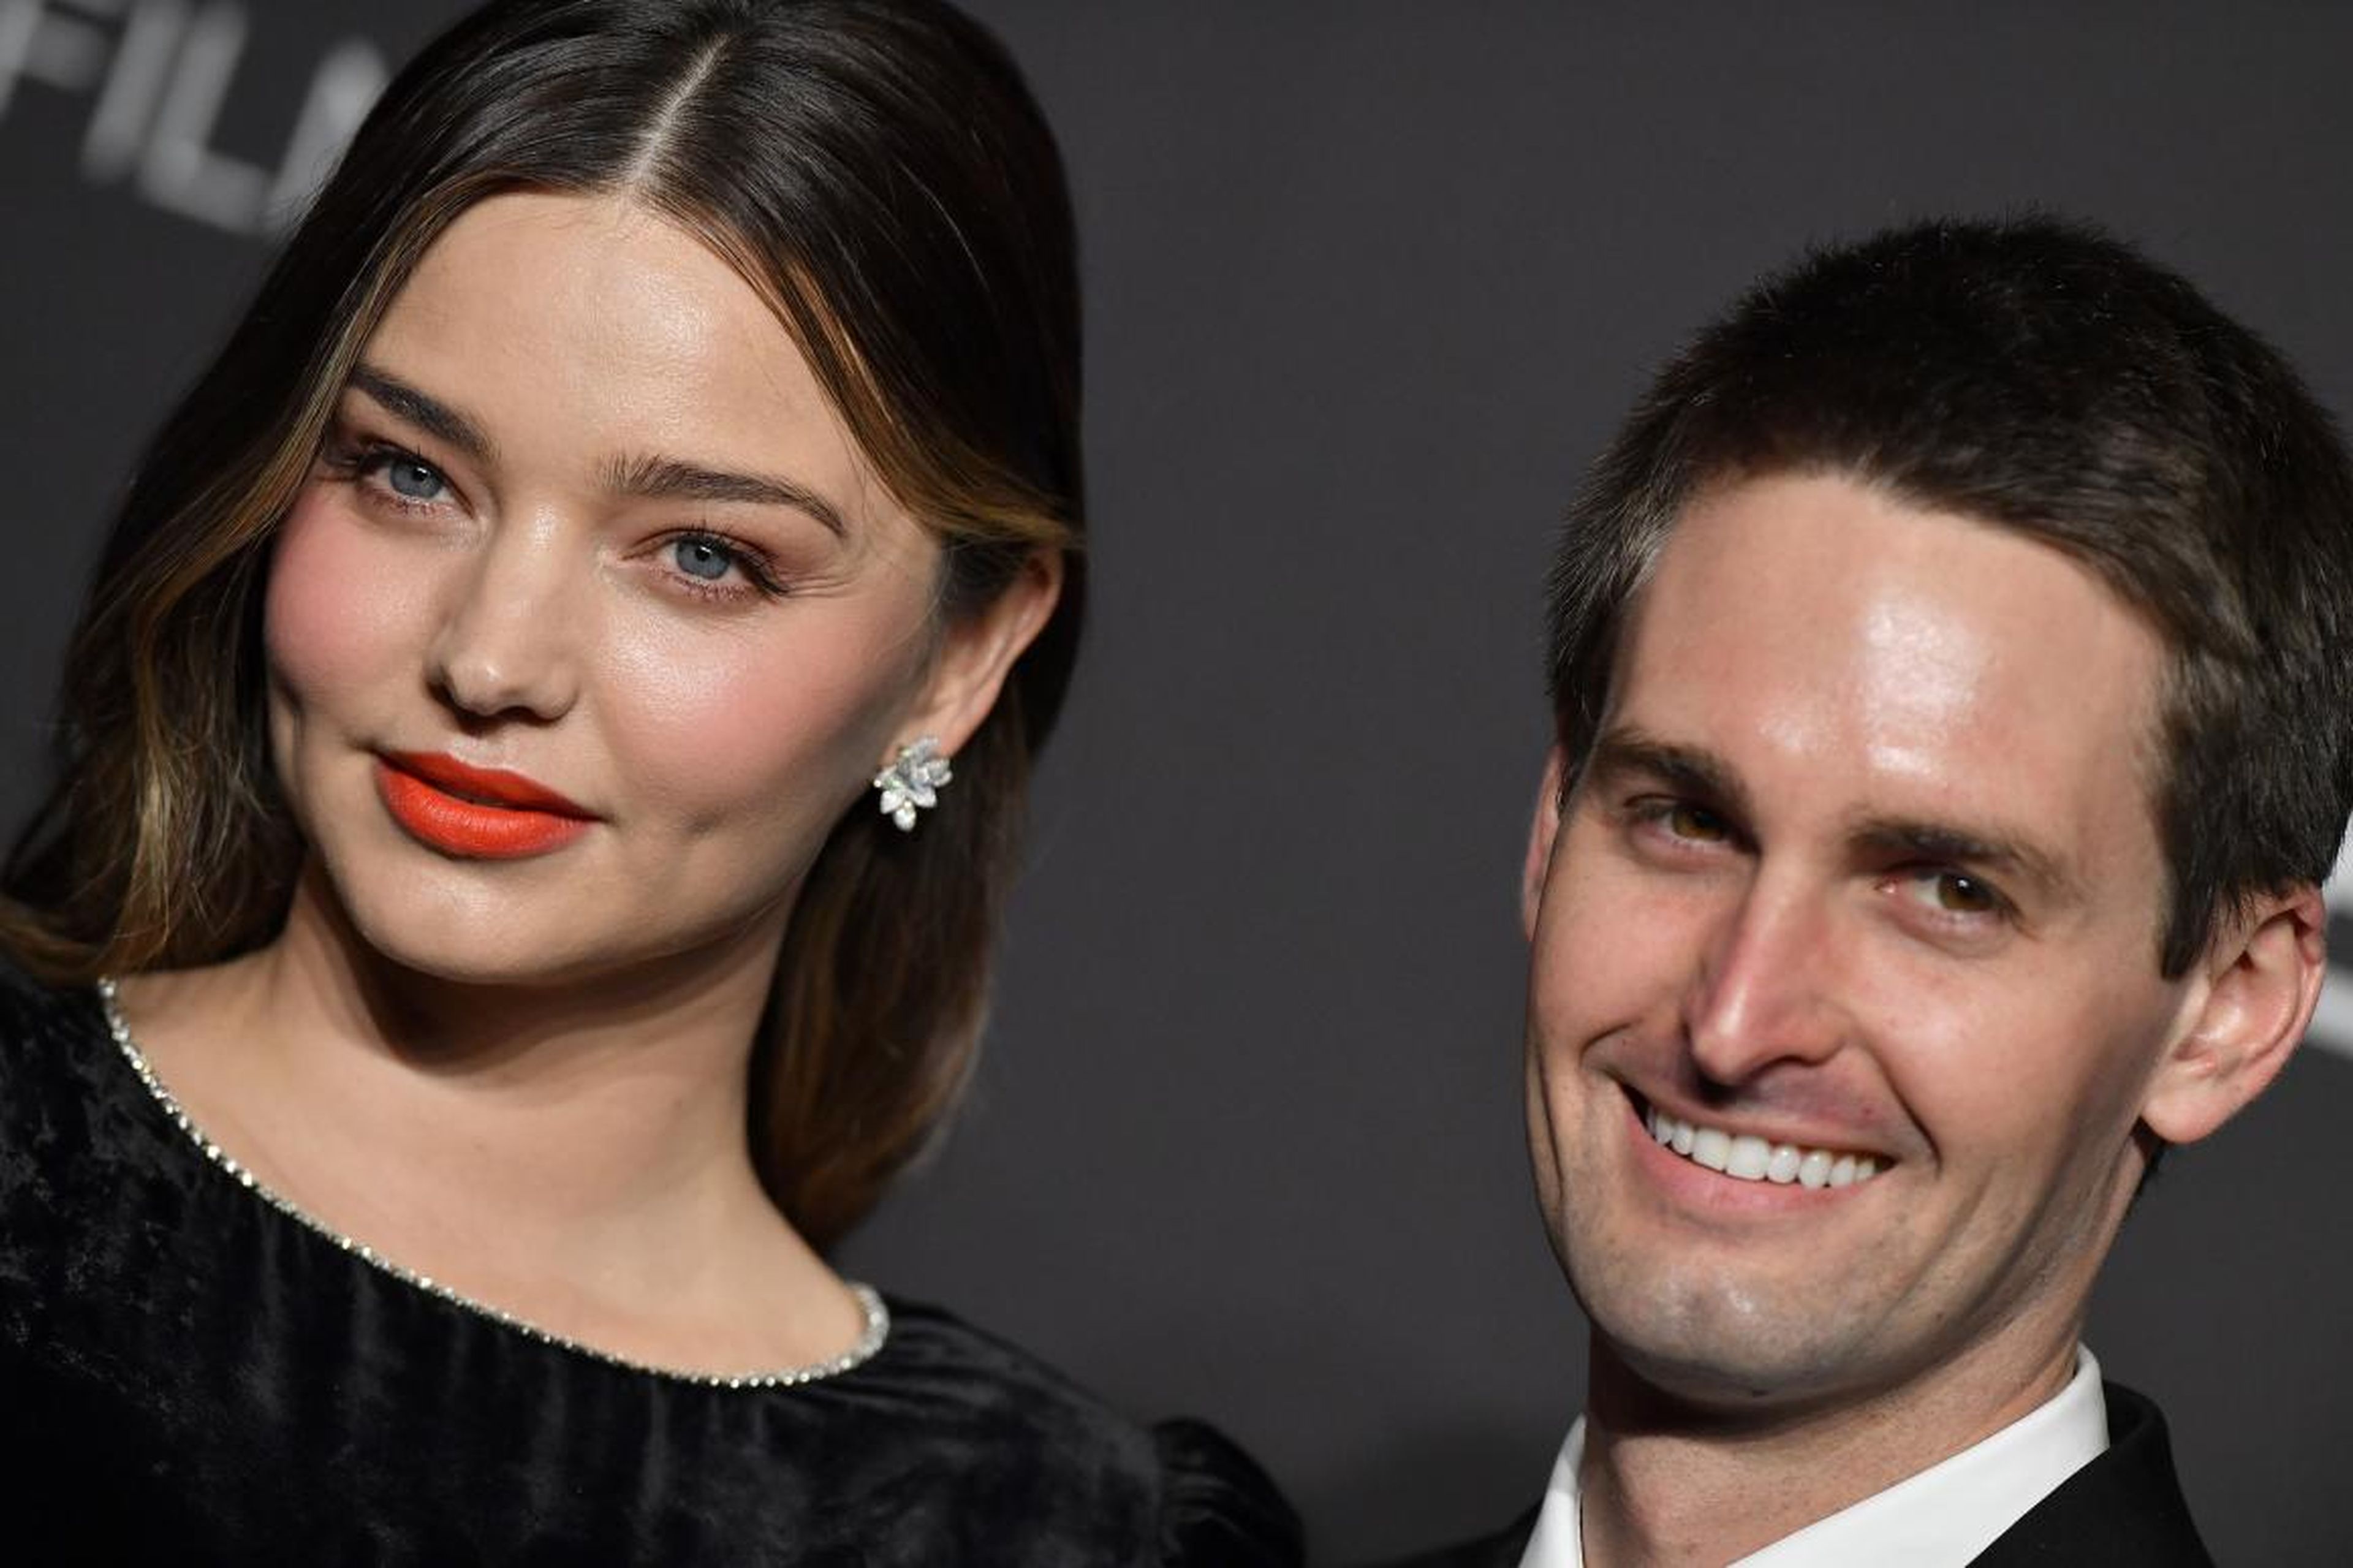 Snapchat founder Evan Spiegel and wife Miranda Kerr only allow their seven-year-old child to have 1.5 hours of screen time per week